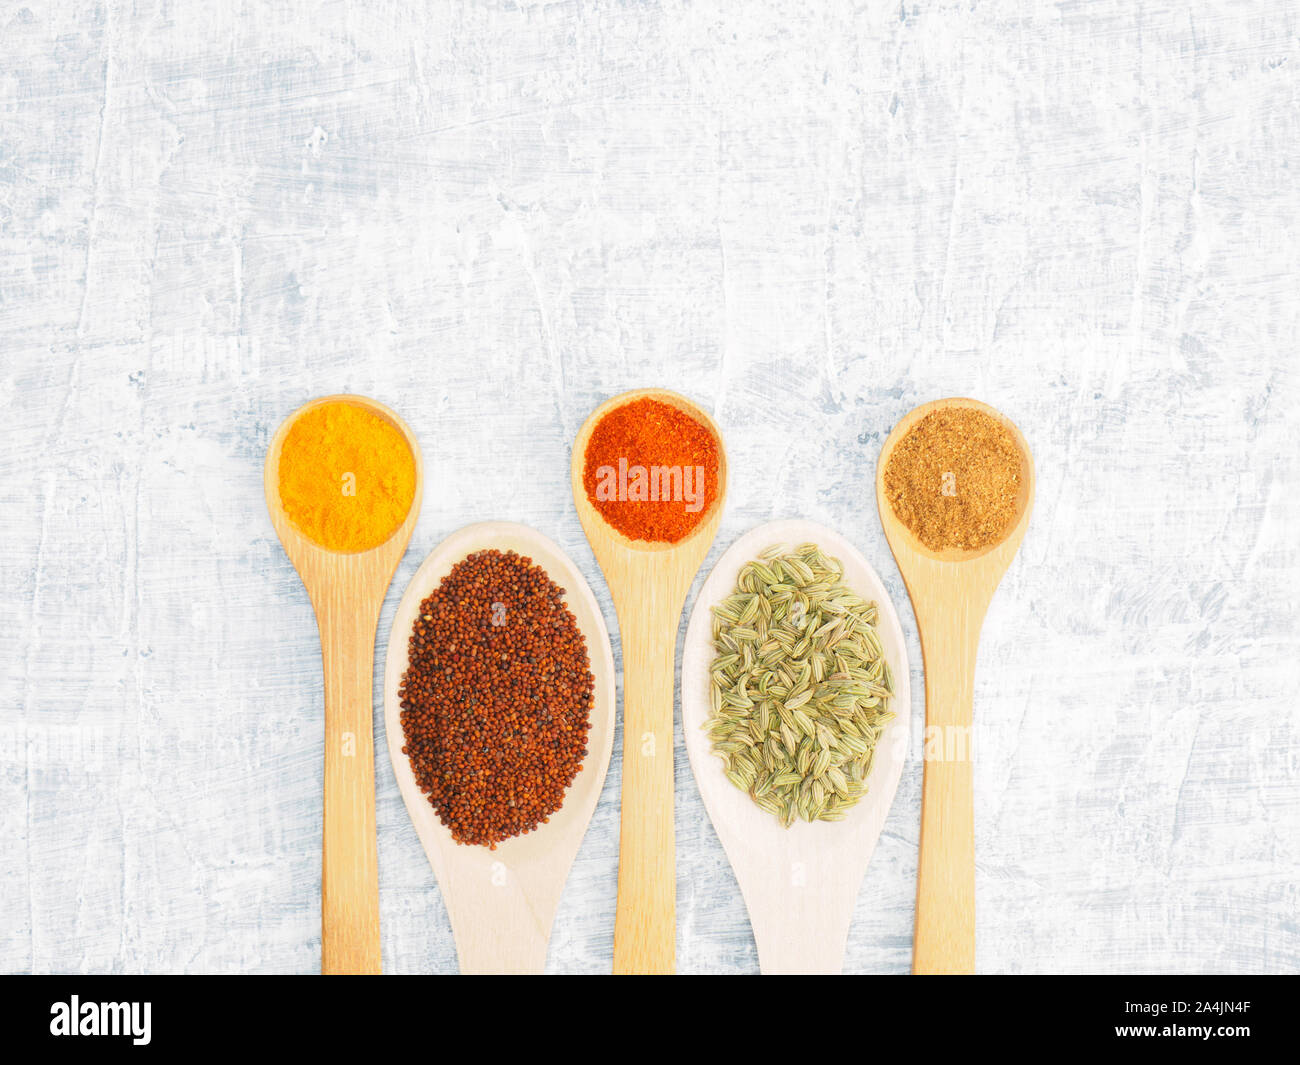 Spices and herbs set on concrete background in wooden spoon. Modern apothecary, naturopathy and ayurveda concept. Stock Photo